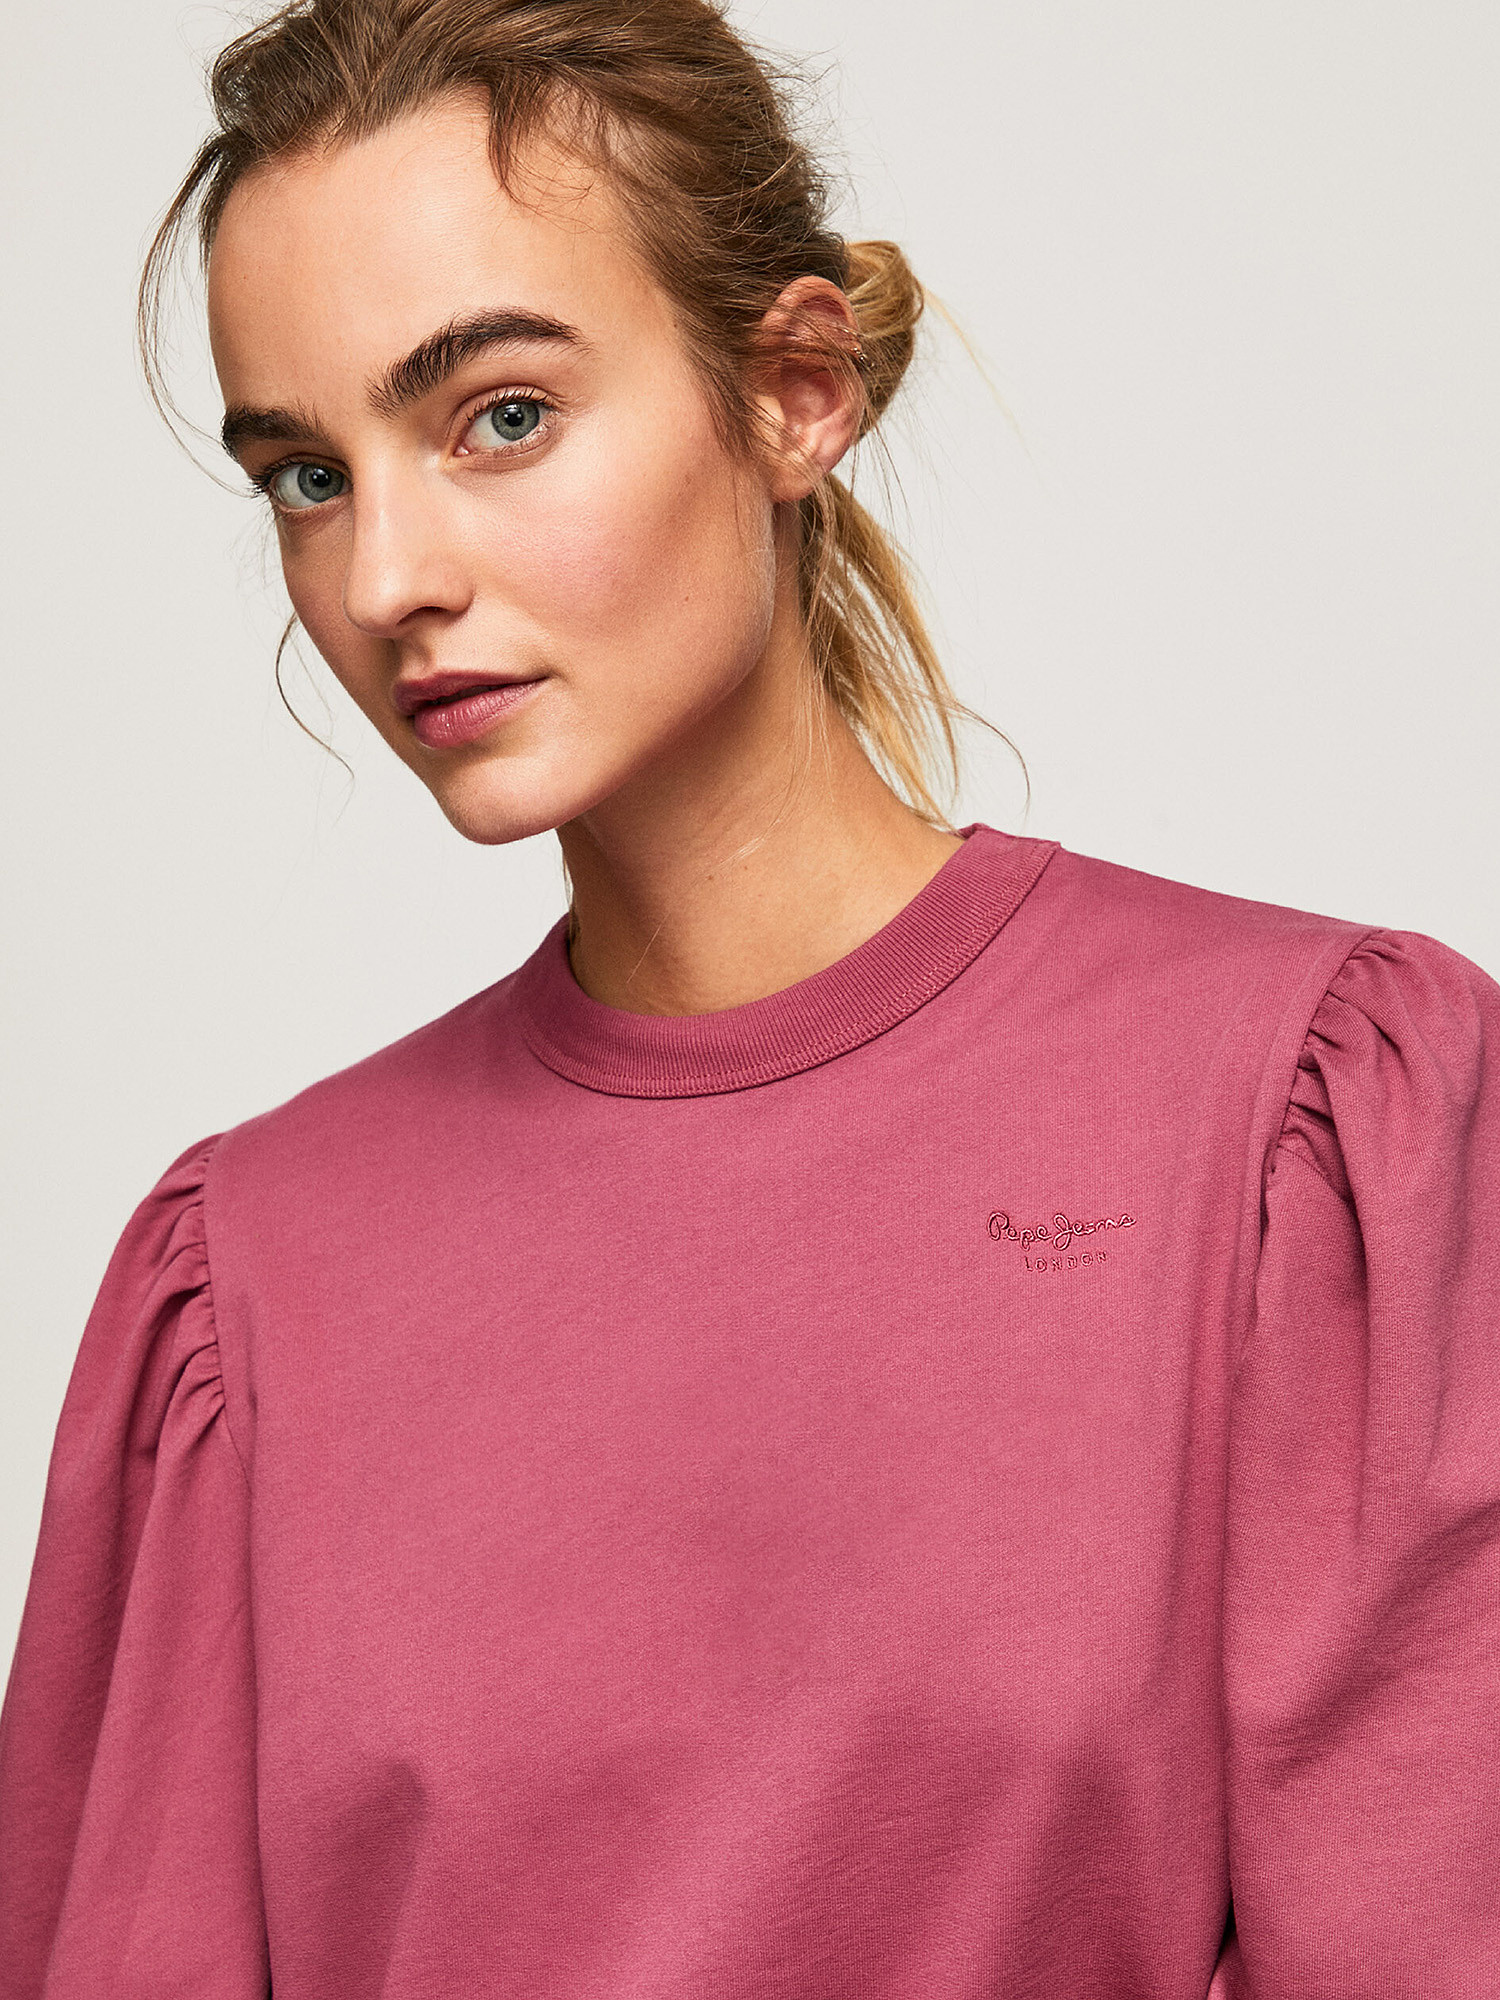 Pepe Jeans - Sweatshirt with puff sleeves, Antique Pink, large image number 4